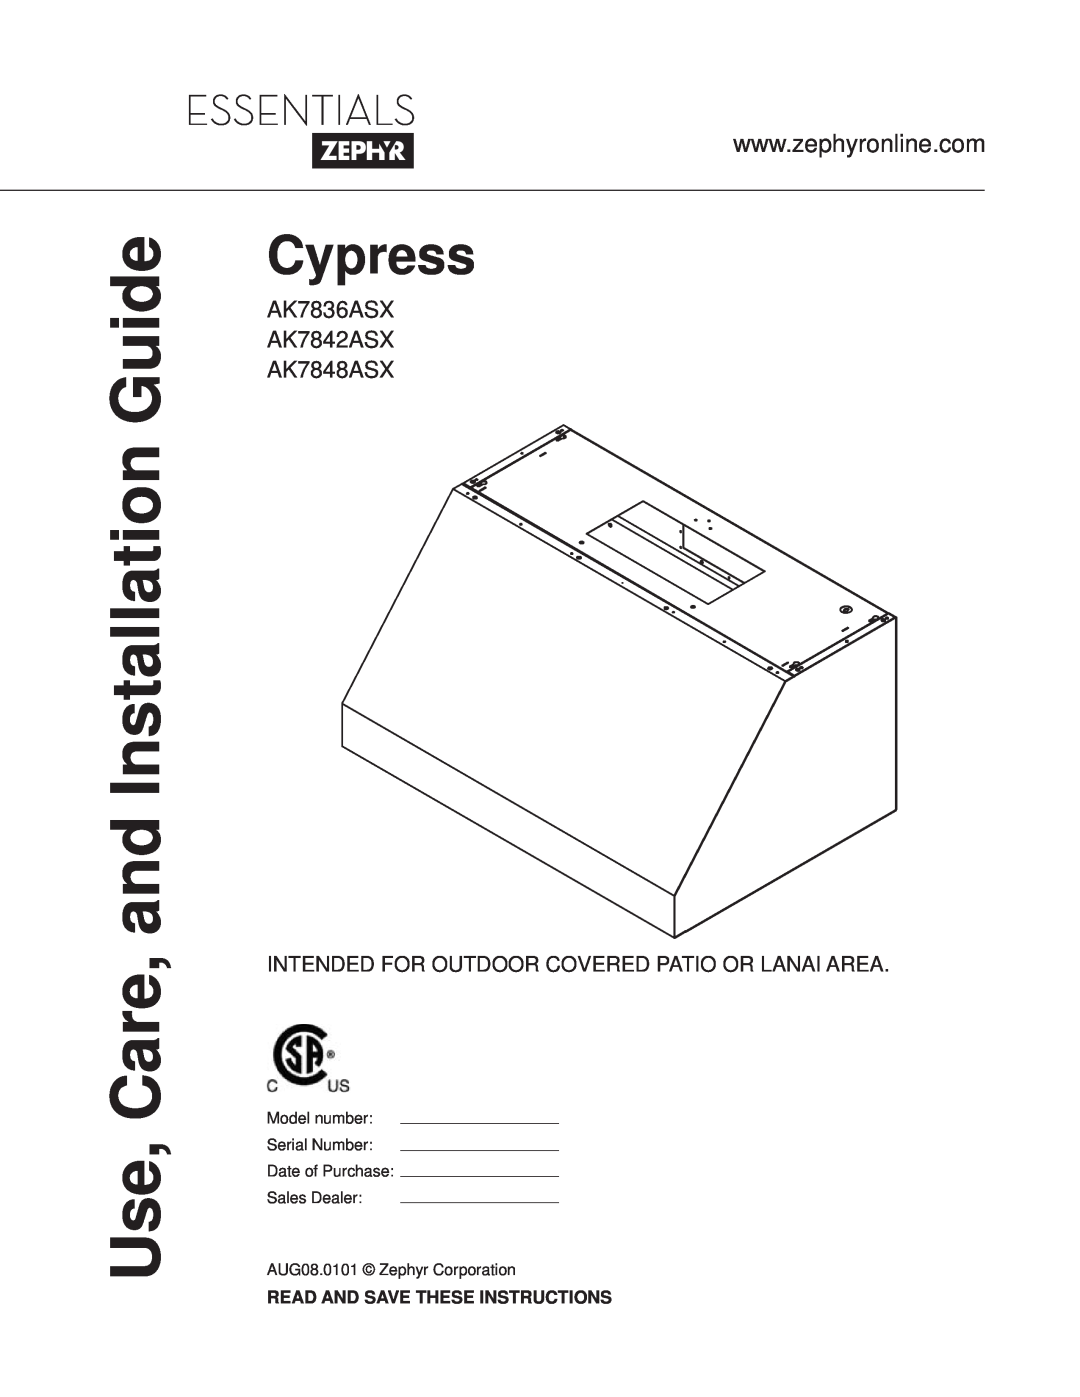 Zephyr AK7848ASX, AK7842ASX, AK7836ASX manual Read And Save These Instructions, Use, Care, and Installation Guide, Cypress 